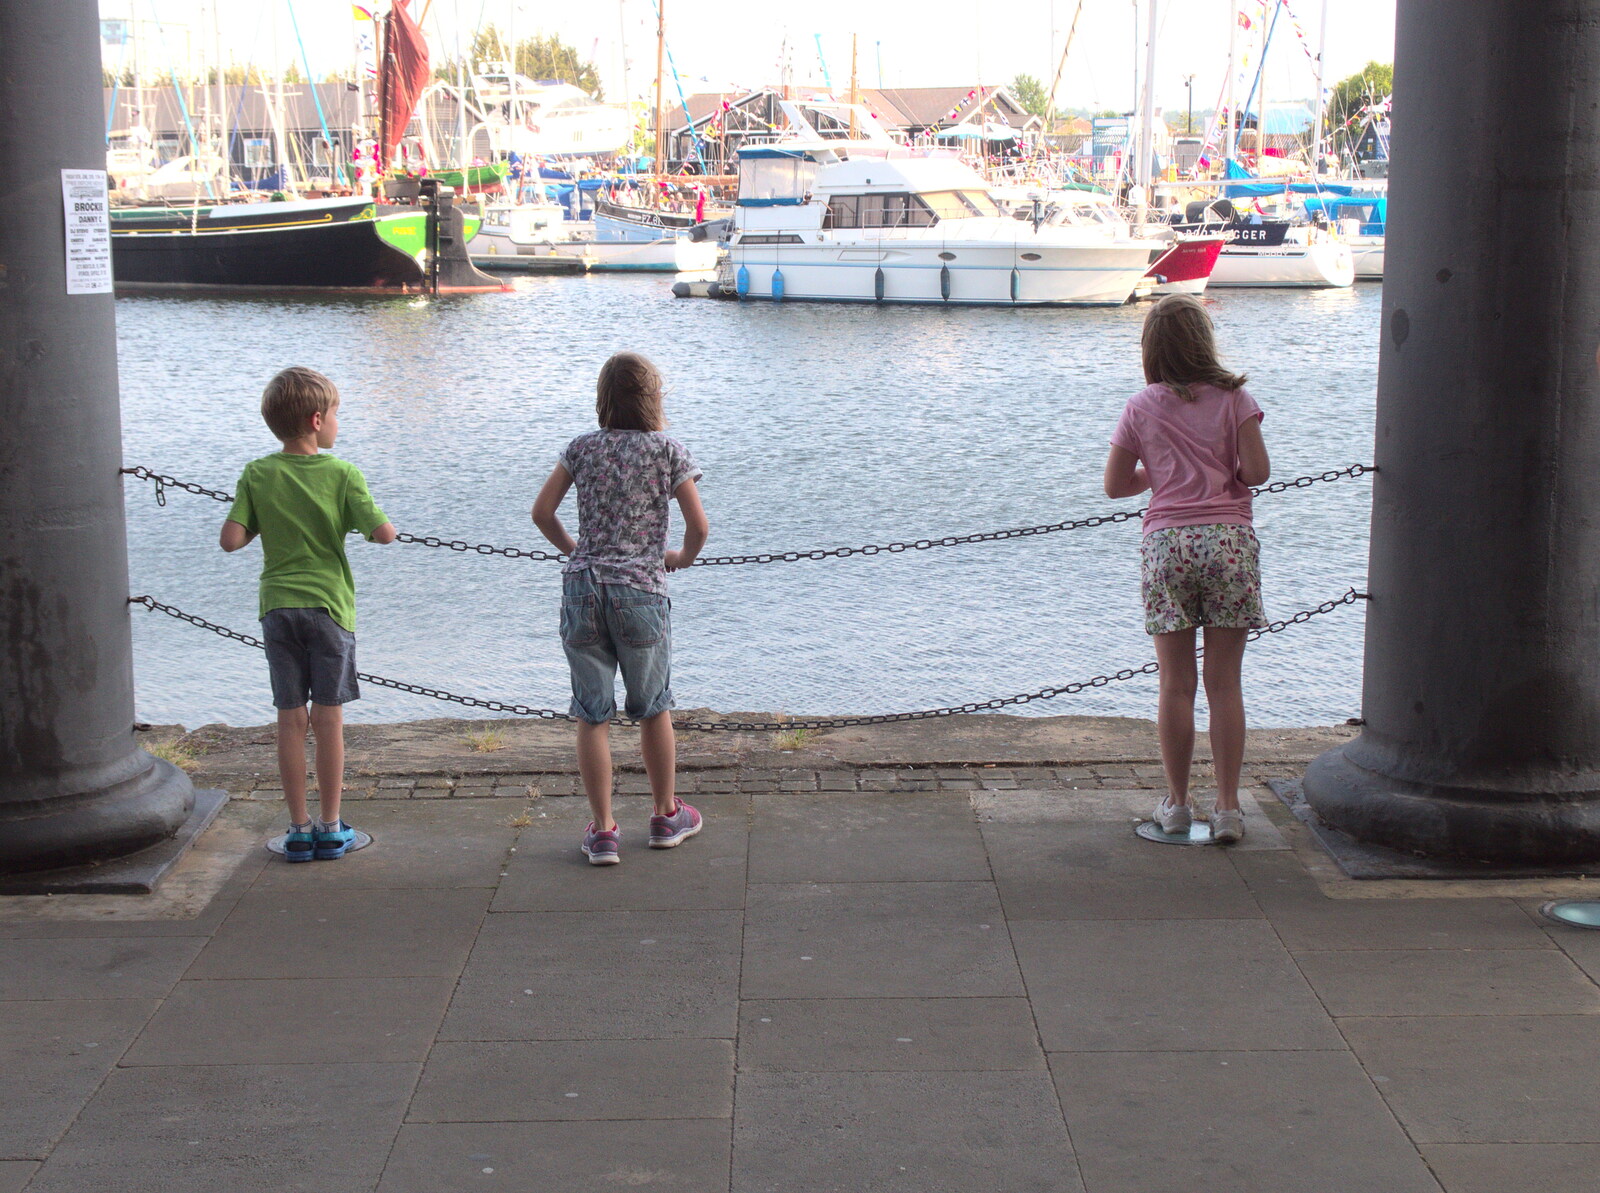 Fred, Sophie and Grace look out into the marina from An Unexpected Birthday, Ipswich, Suffolk - 26th May 2018